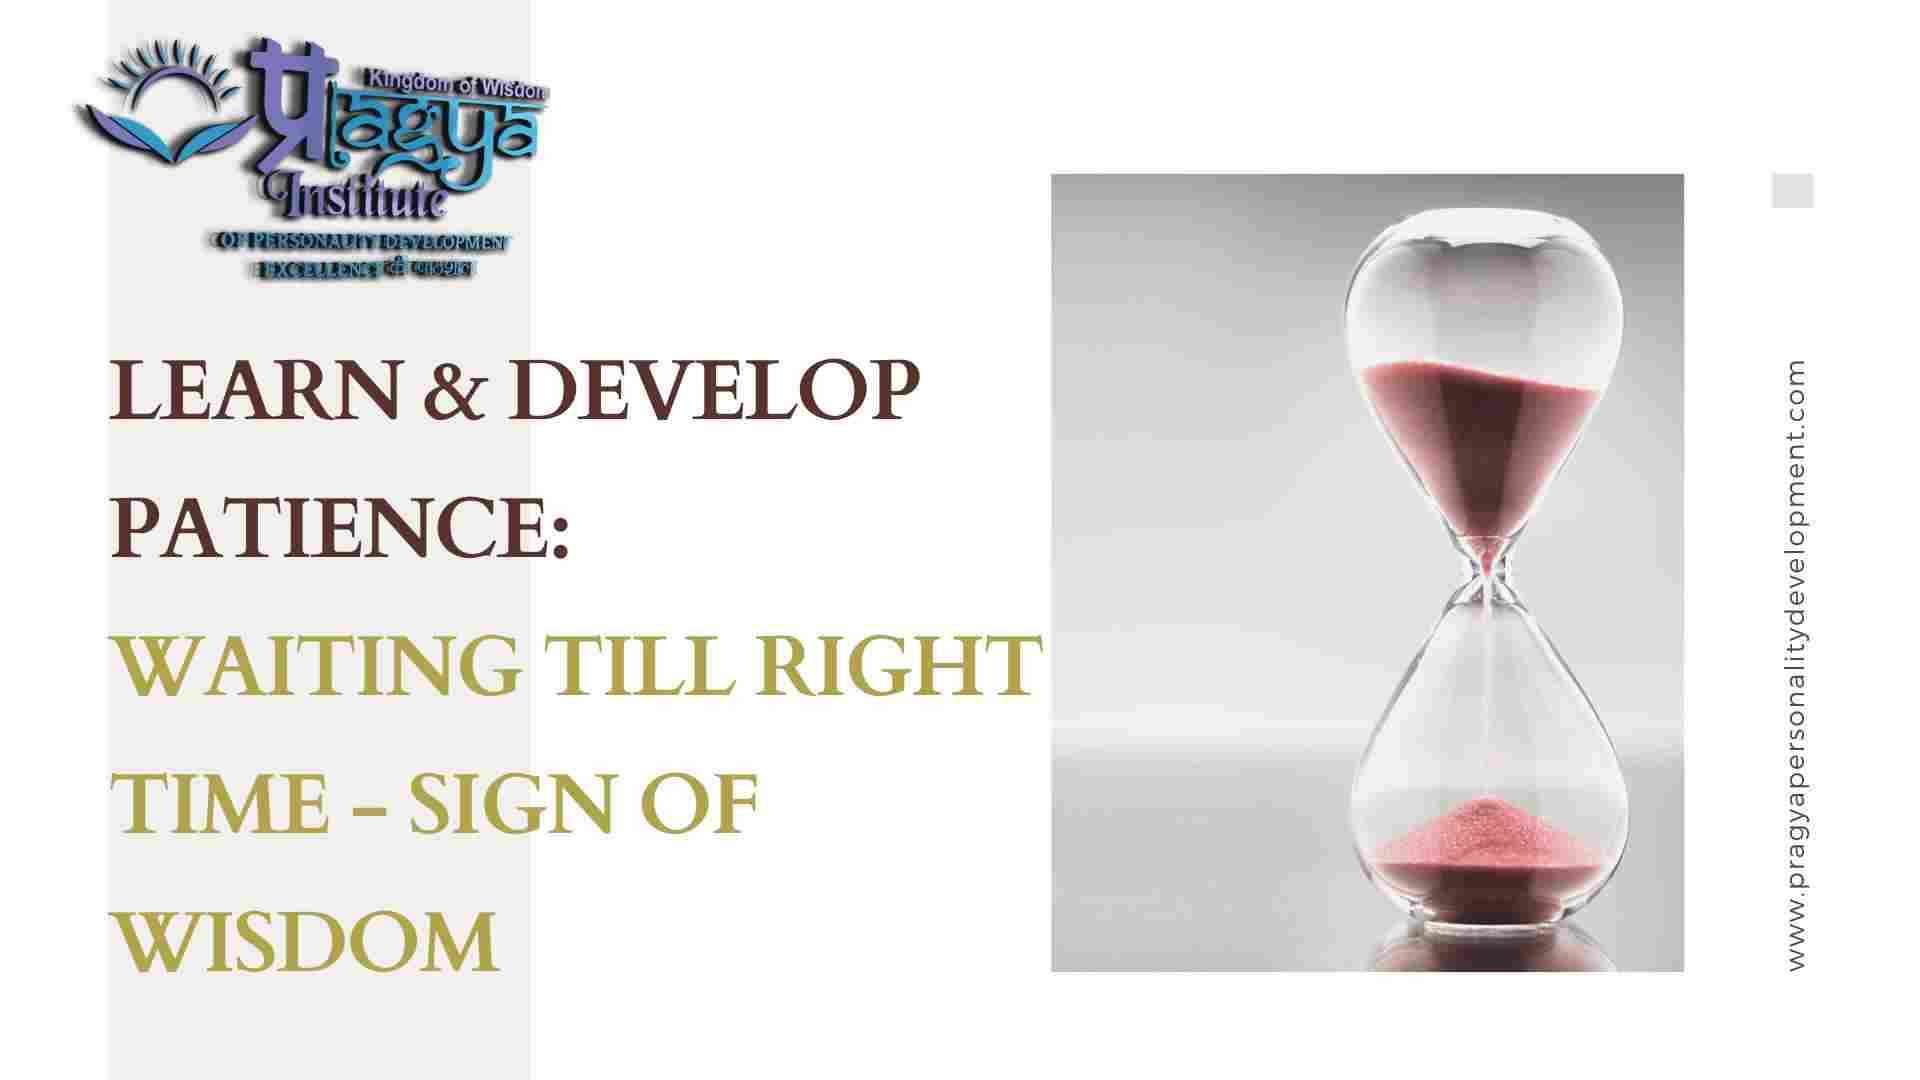 Learn & Develop Patience: Waiting till Right Time - Sign of Wisdom